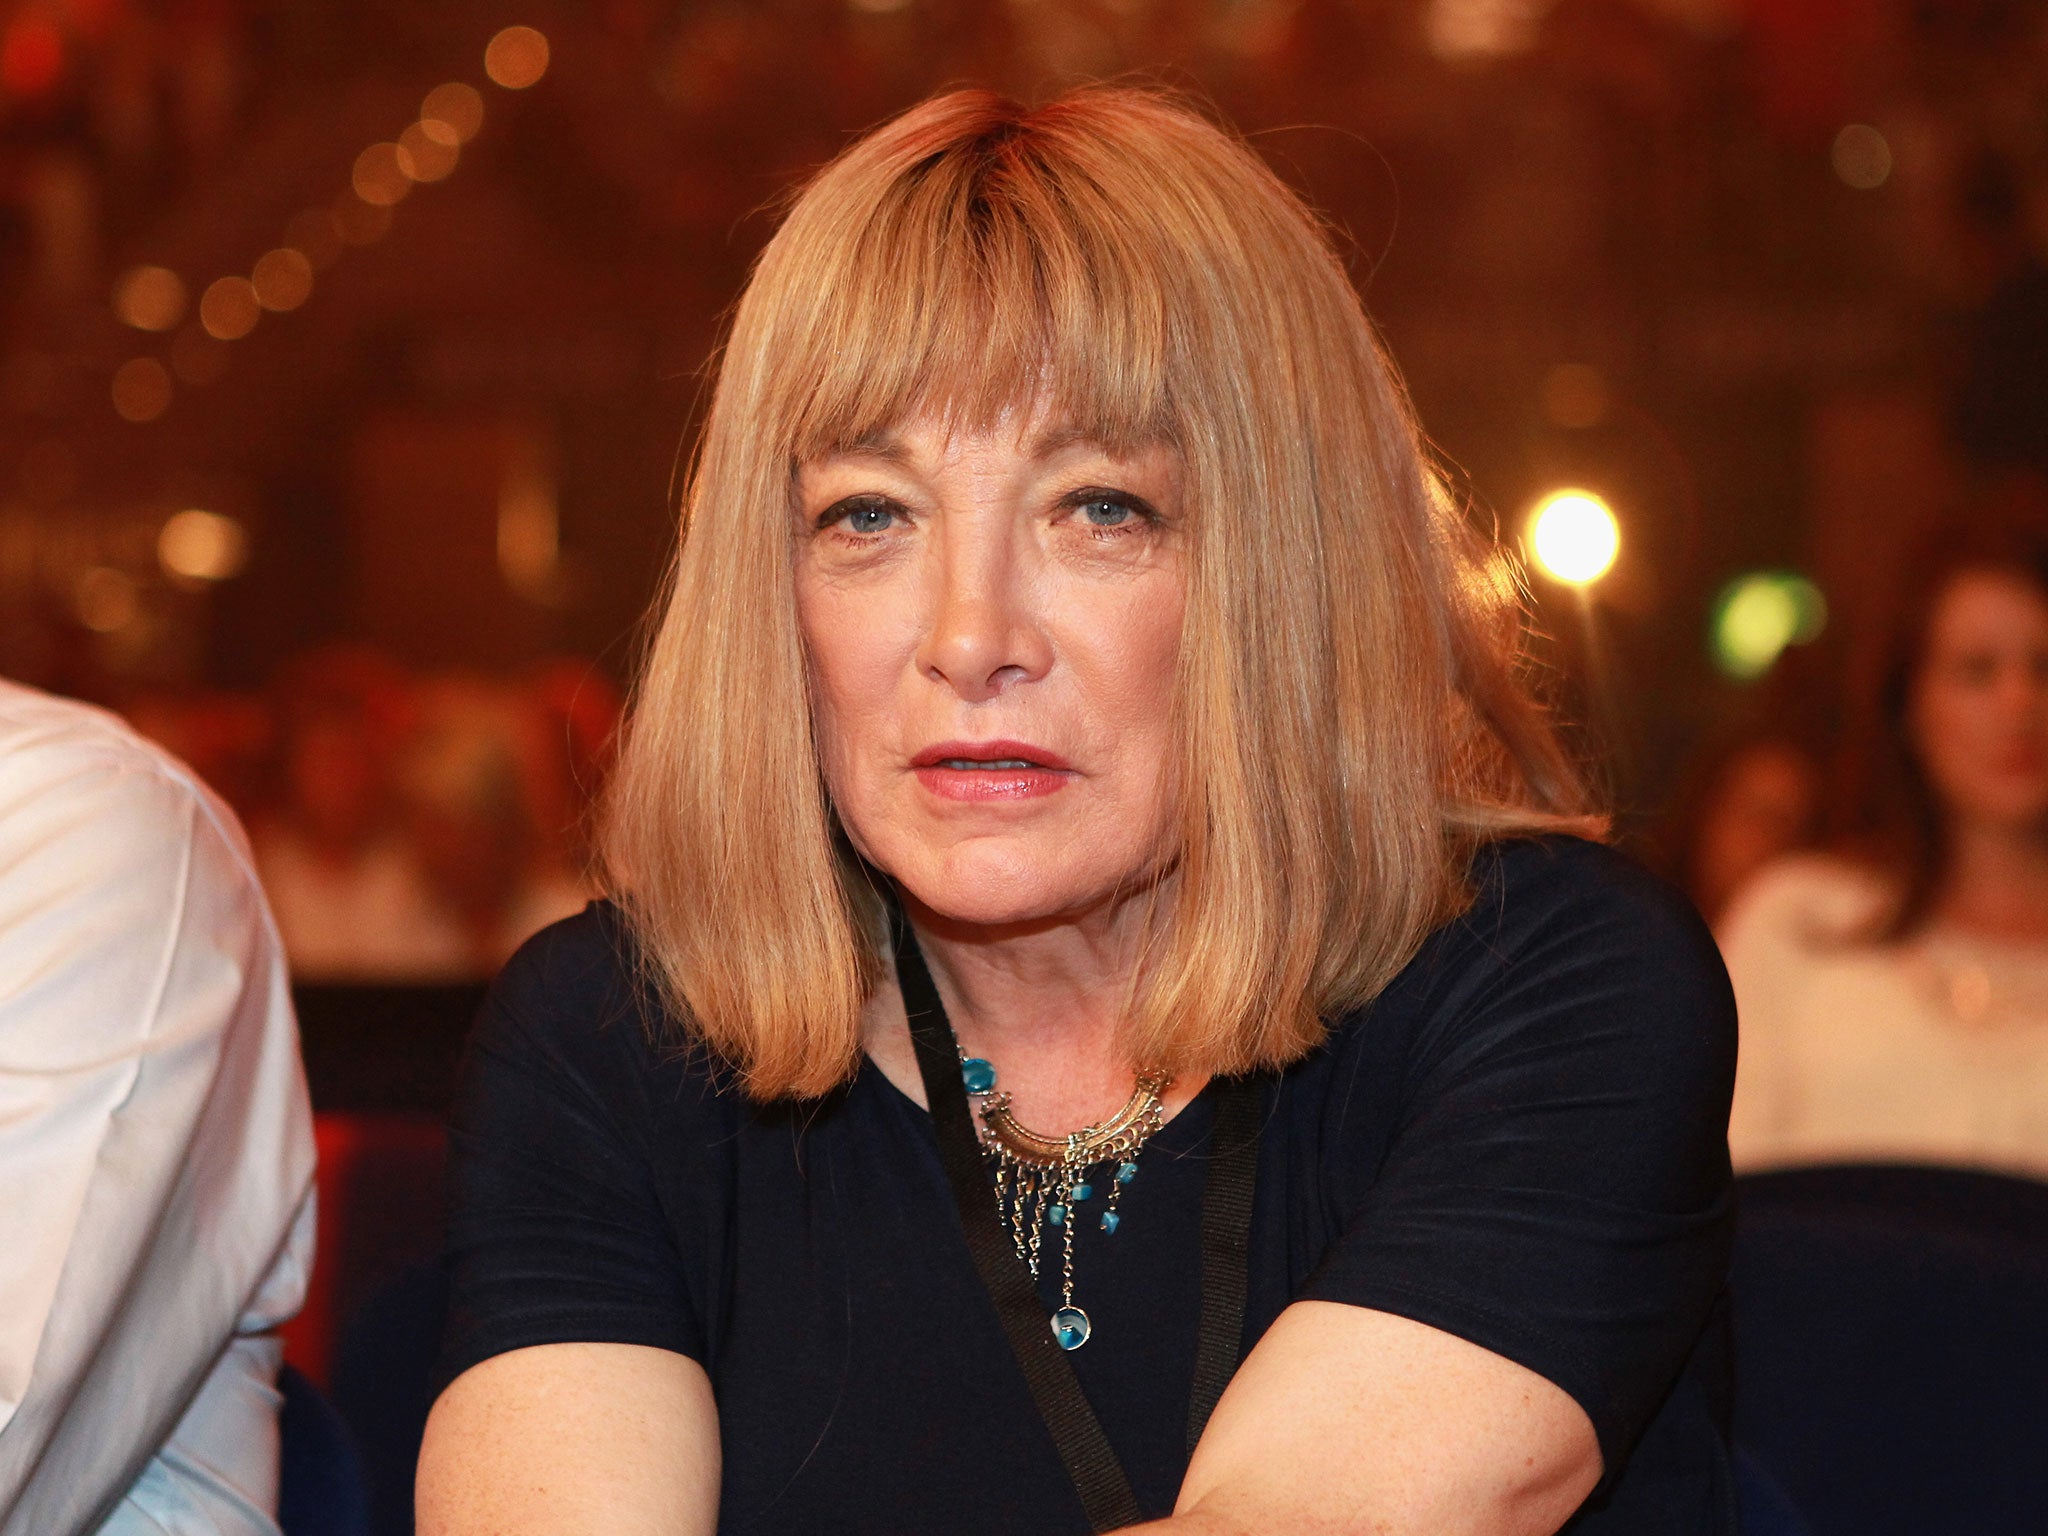 Boxing promoter Kellie Maloney, formerly known as Frank Maloney, entered the 2014 Celebrity Big Brother house